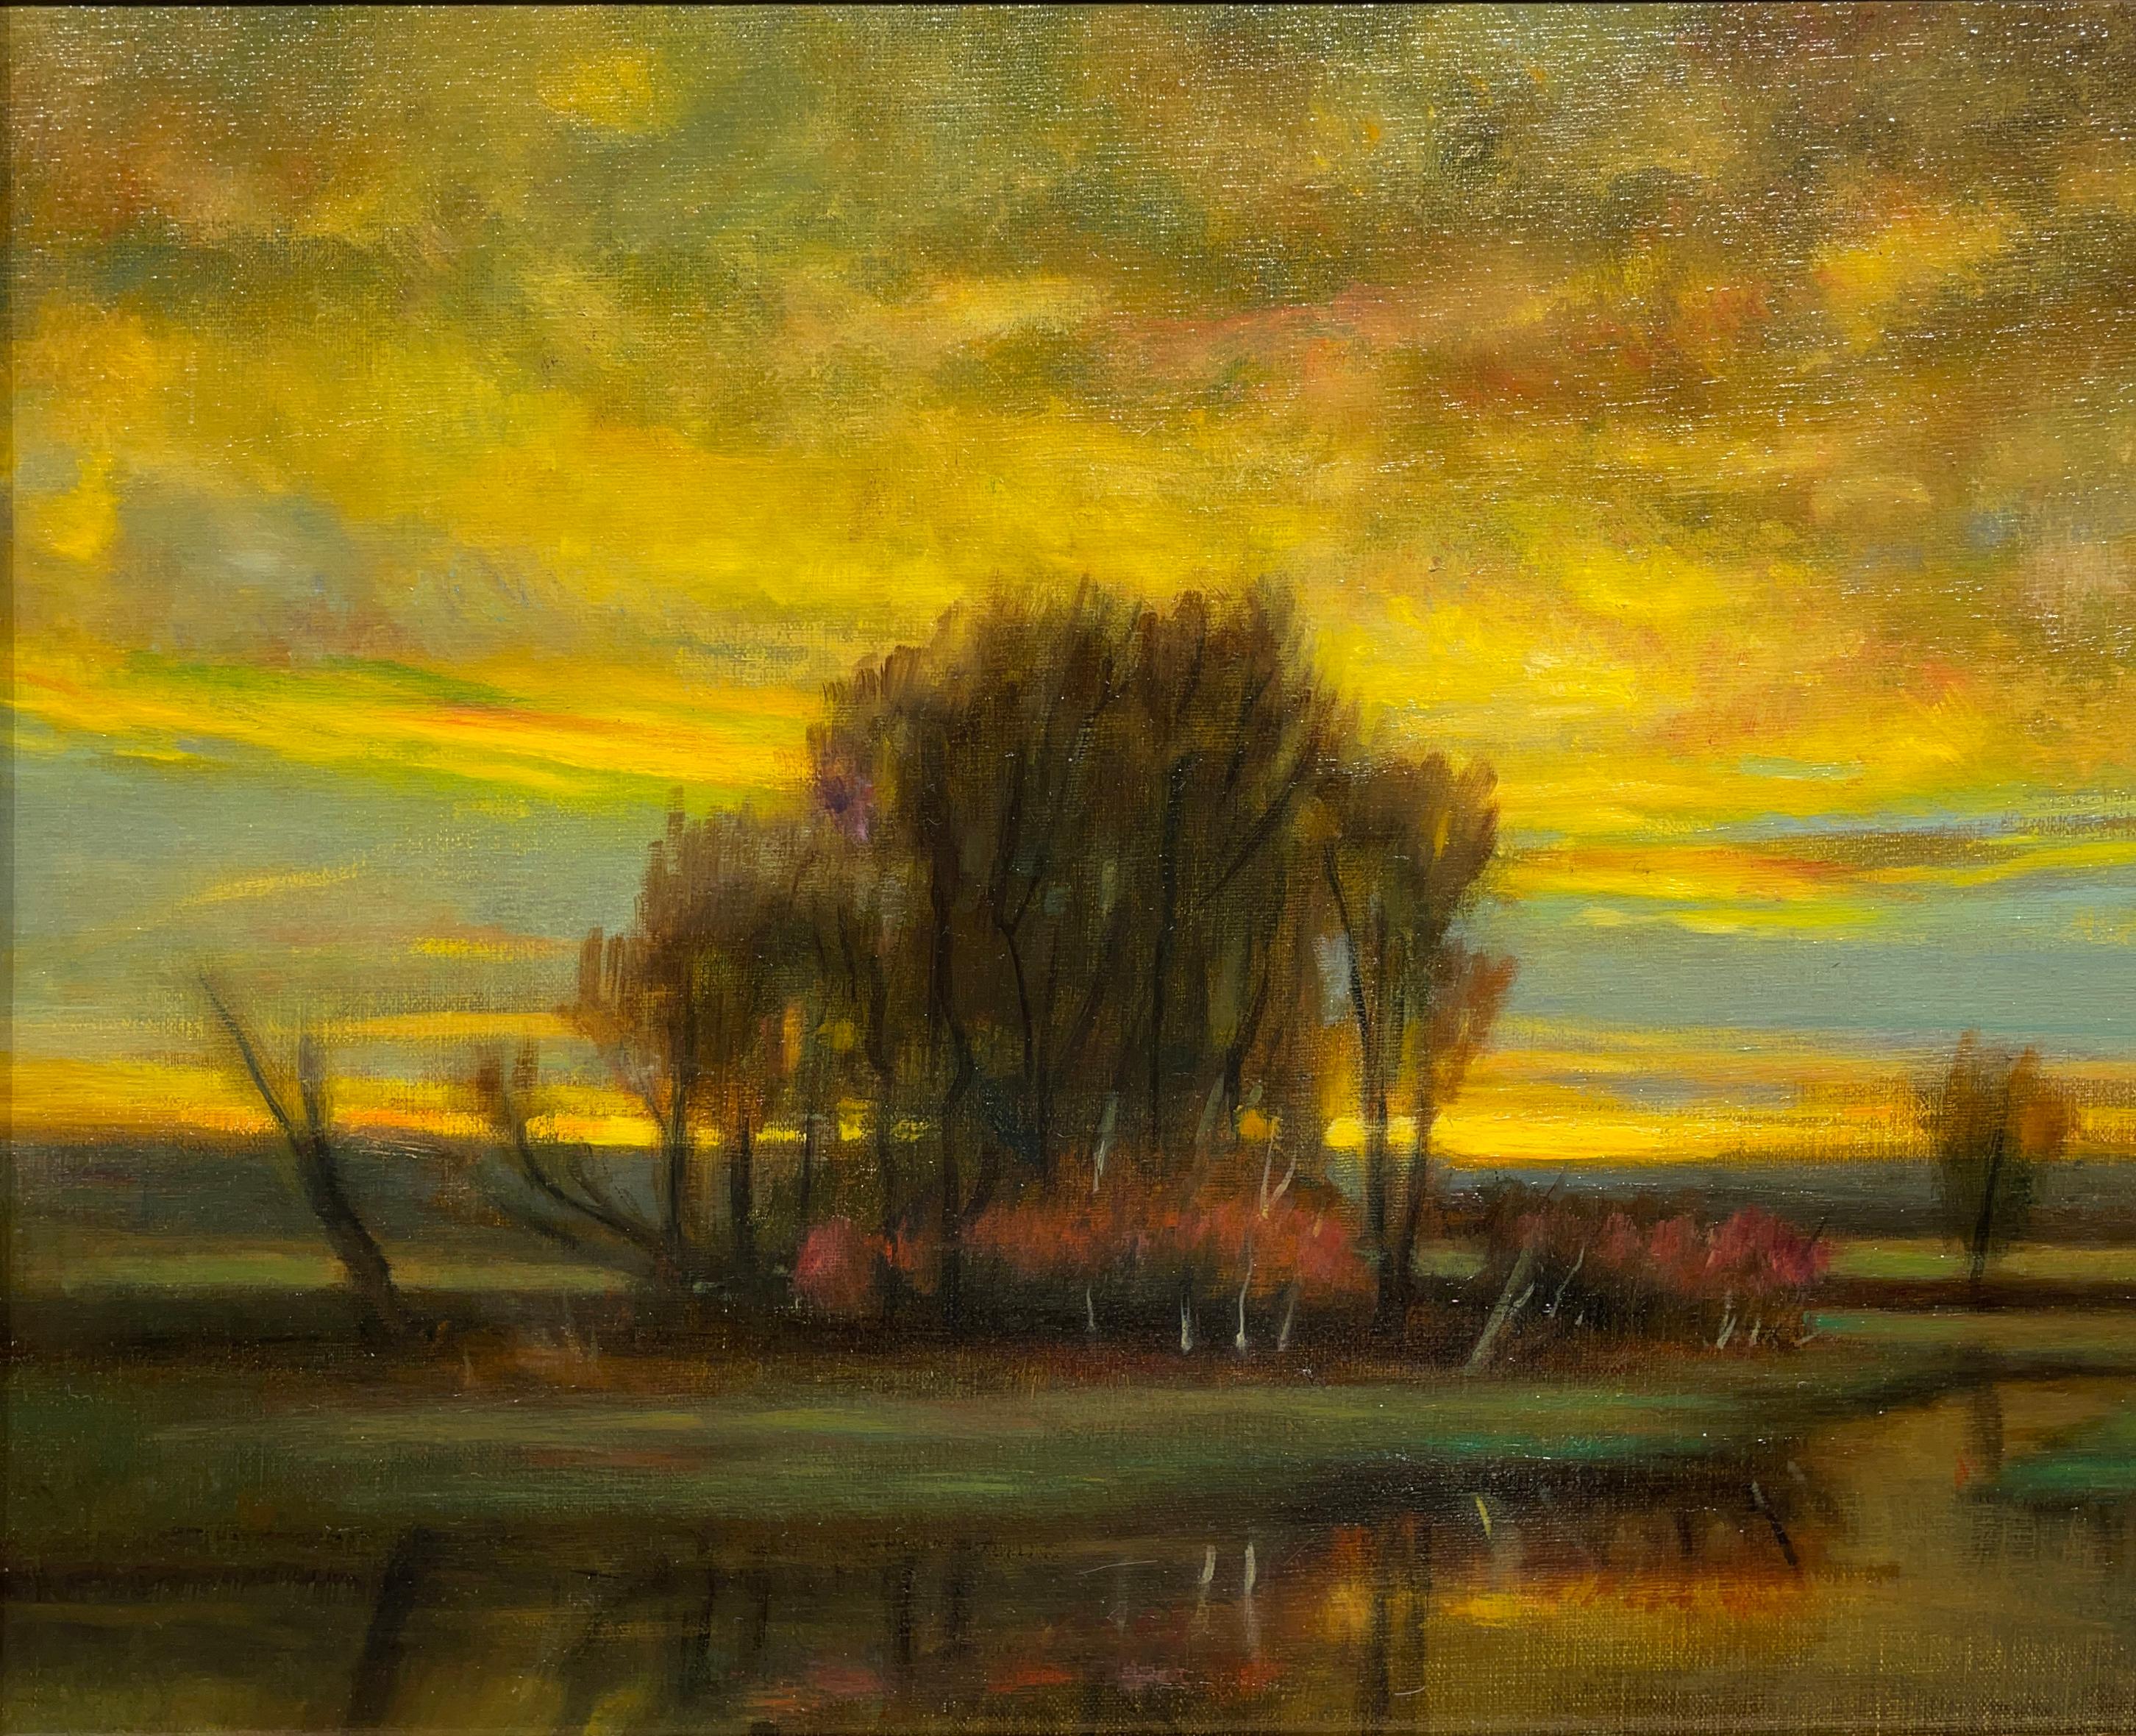 Sunburst, Rising Sun - Reflective Golden Clouds, Marshy Landscape, Original Oil  - Contemporary Painting by Rose Freymuth-Frazier